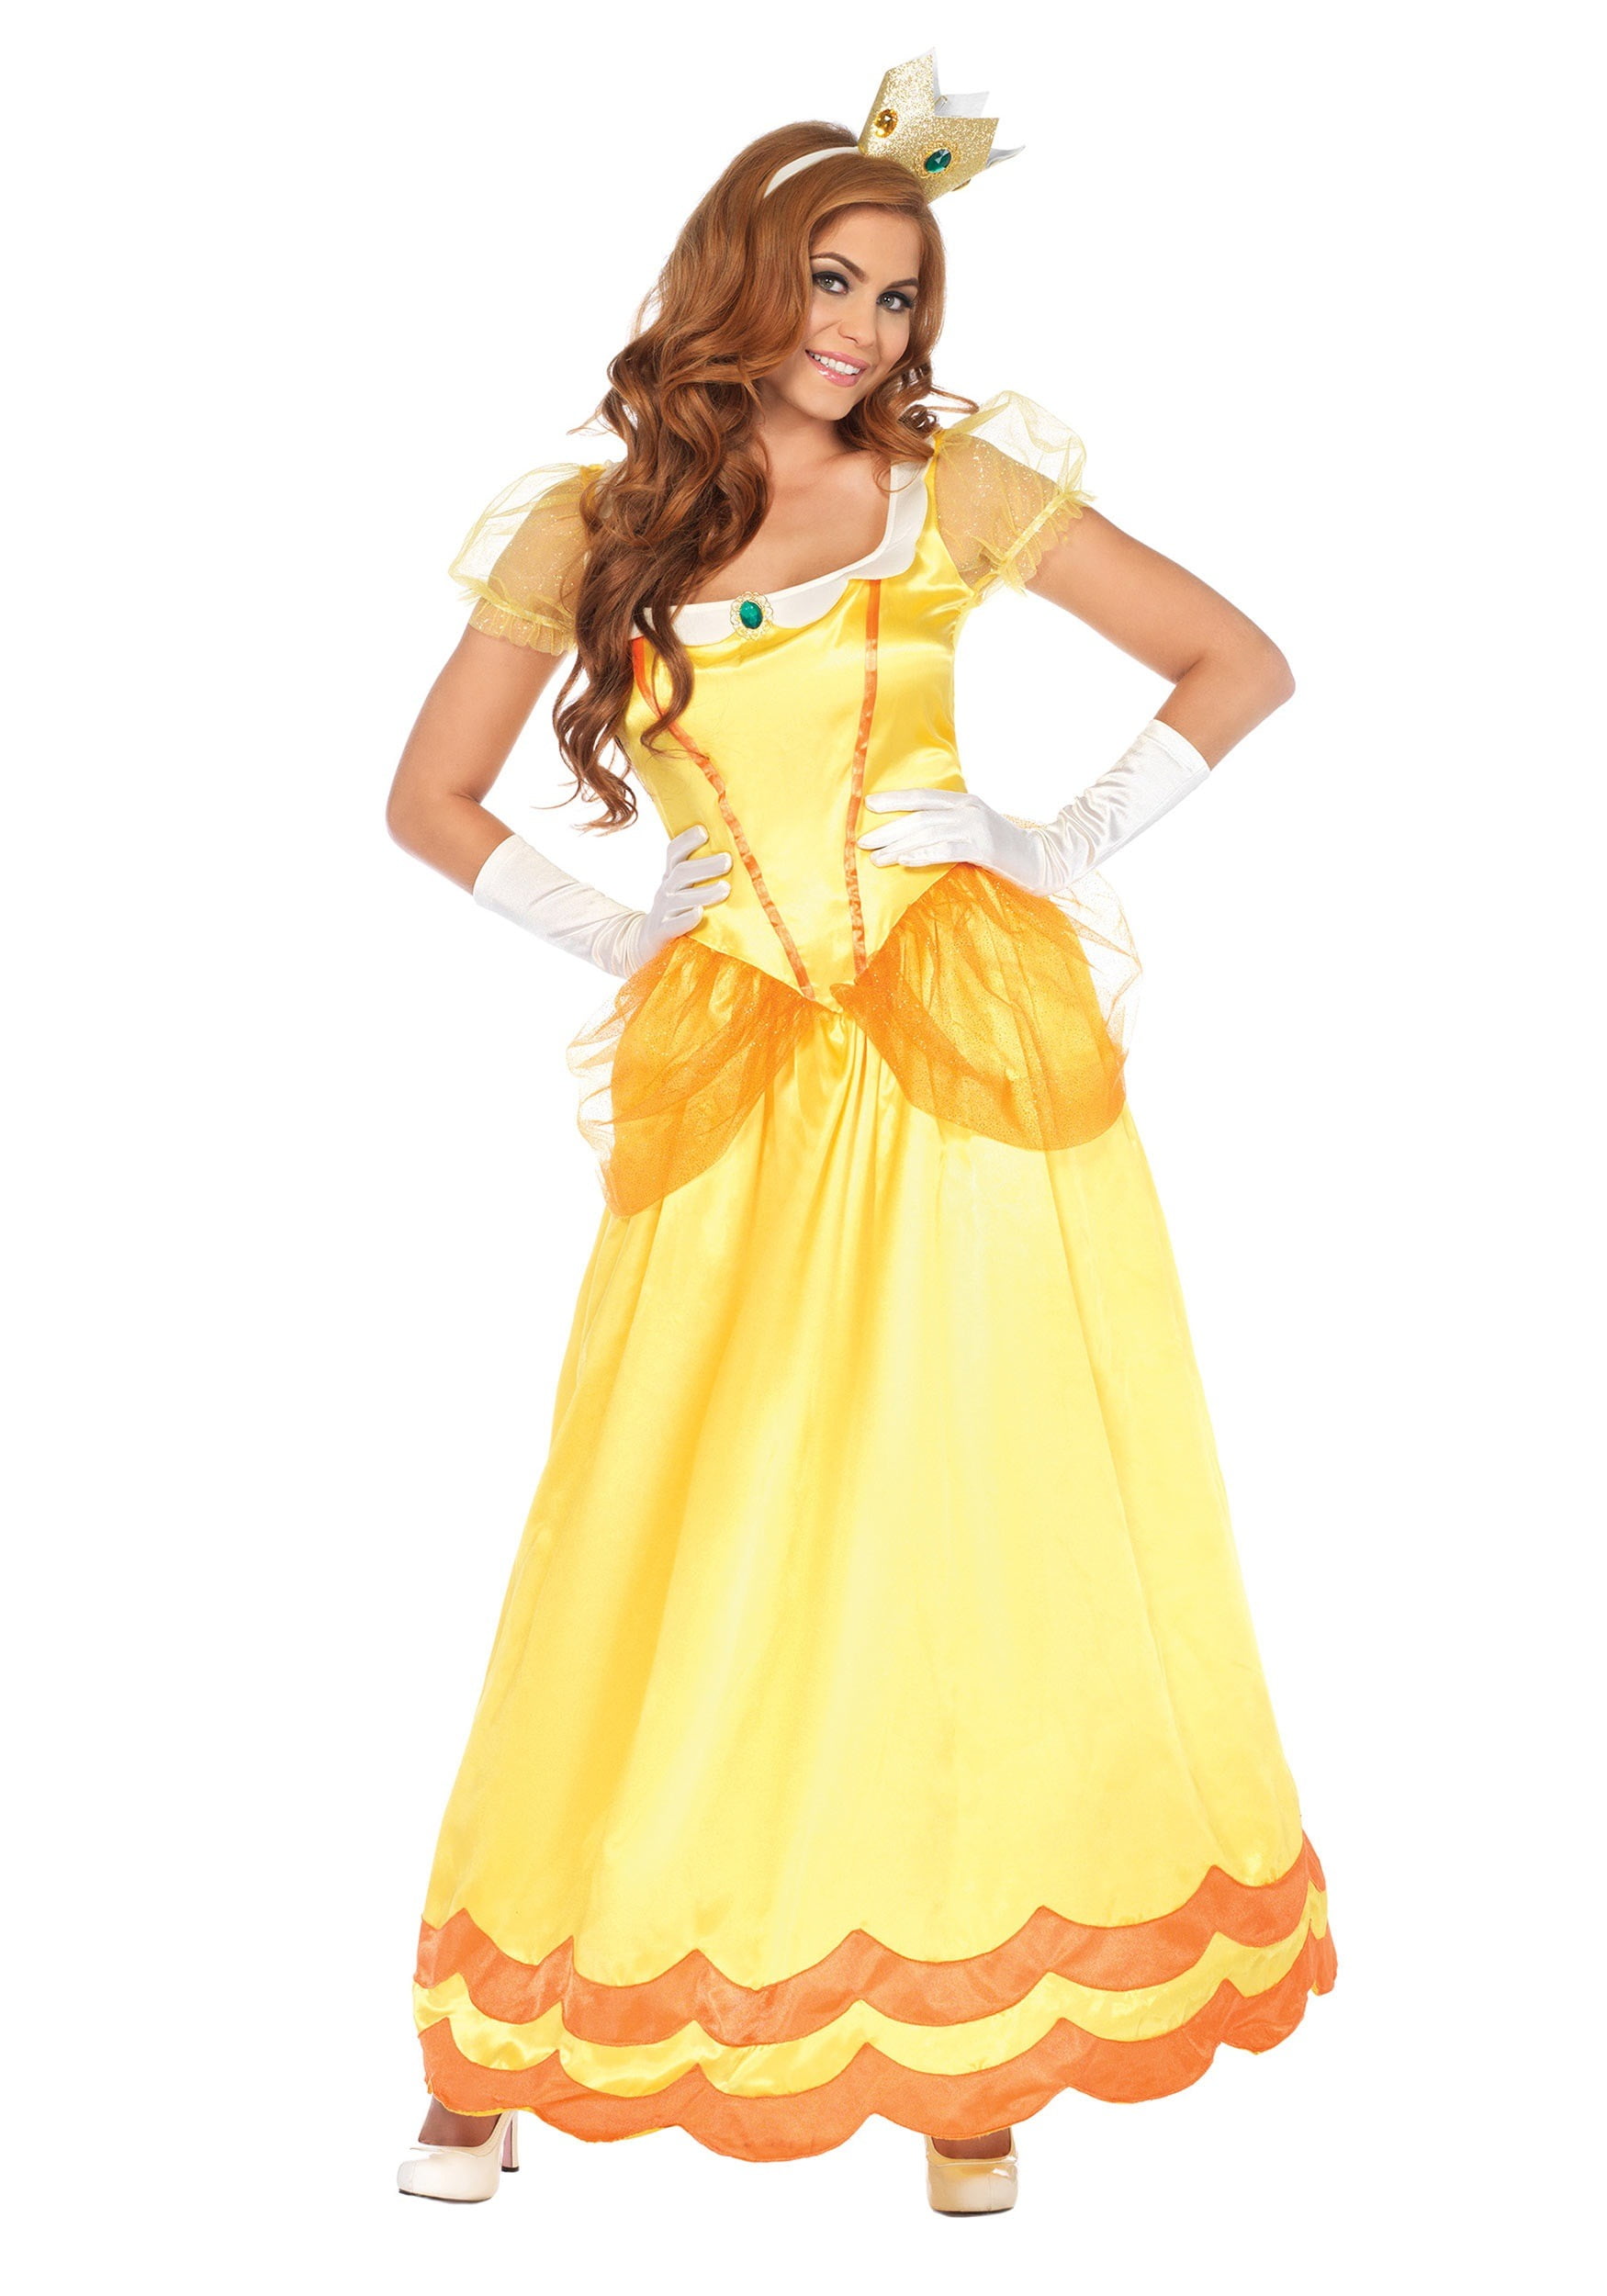 Belle Costume, Beauty and the Beast, Disney Princess Costume Dress  Inspired, Disney Cosplay Costume, Belle Adult Unique Costume, 